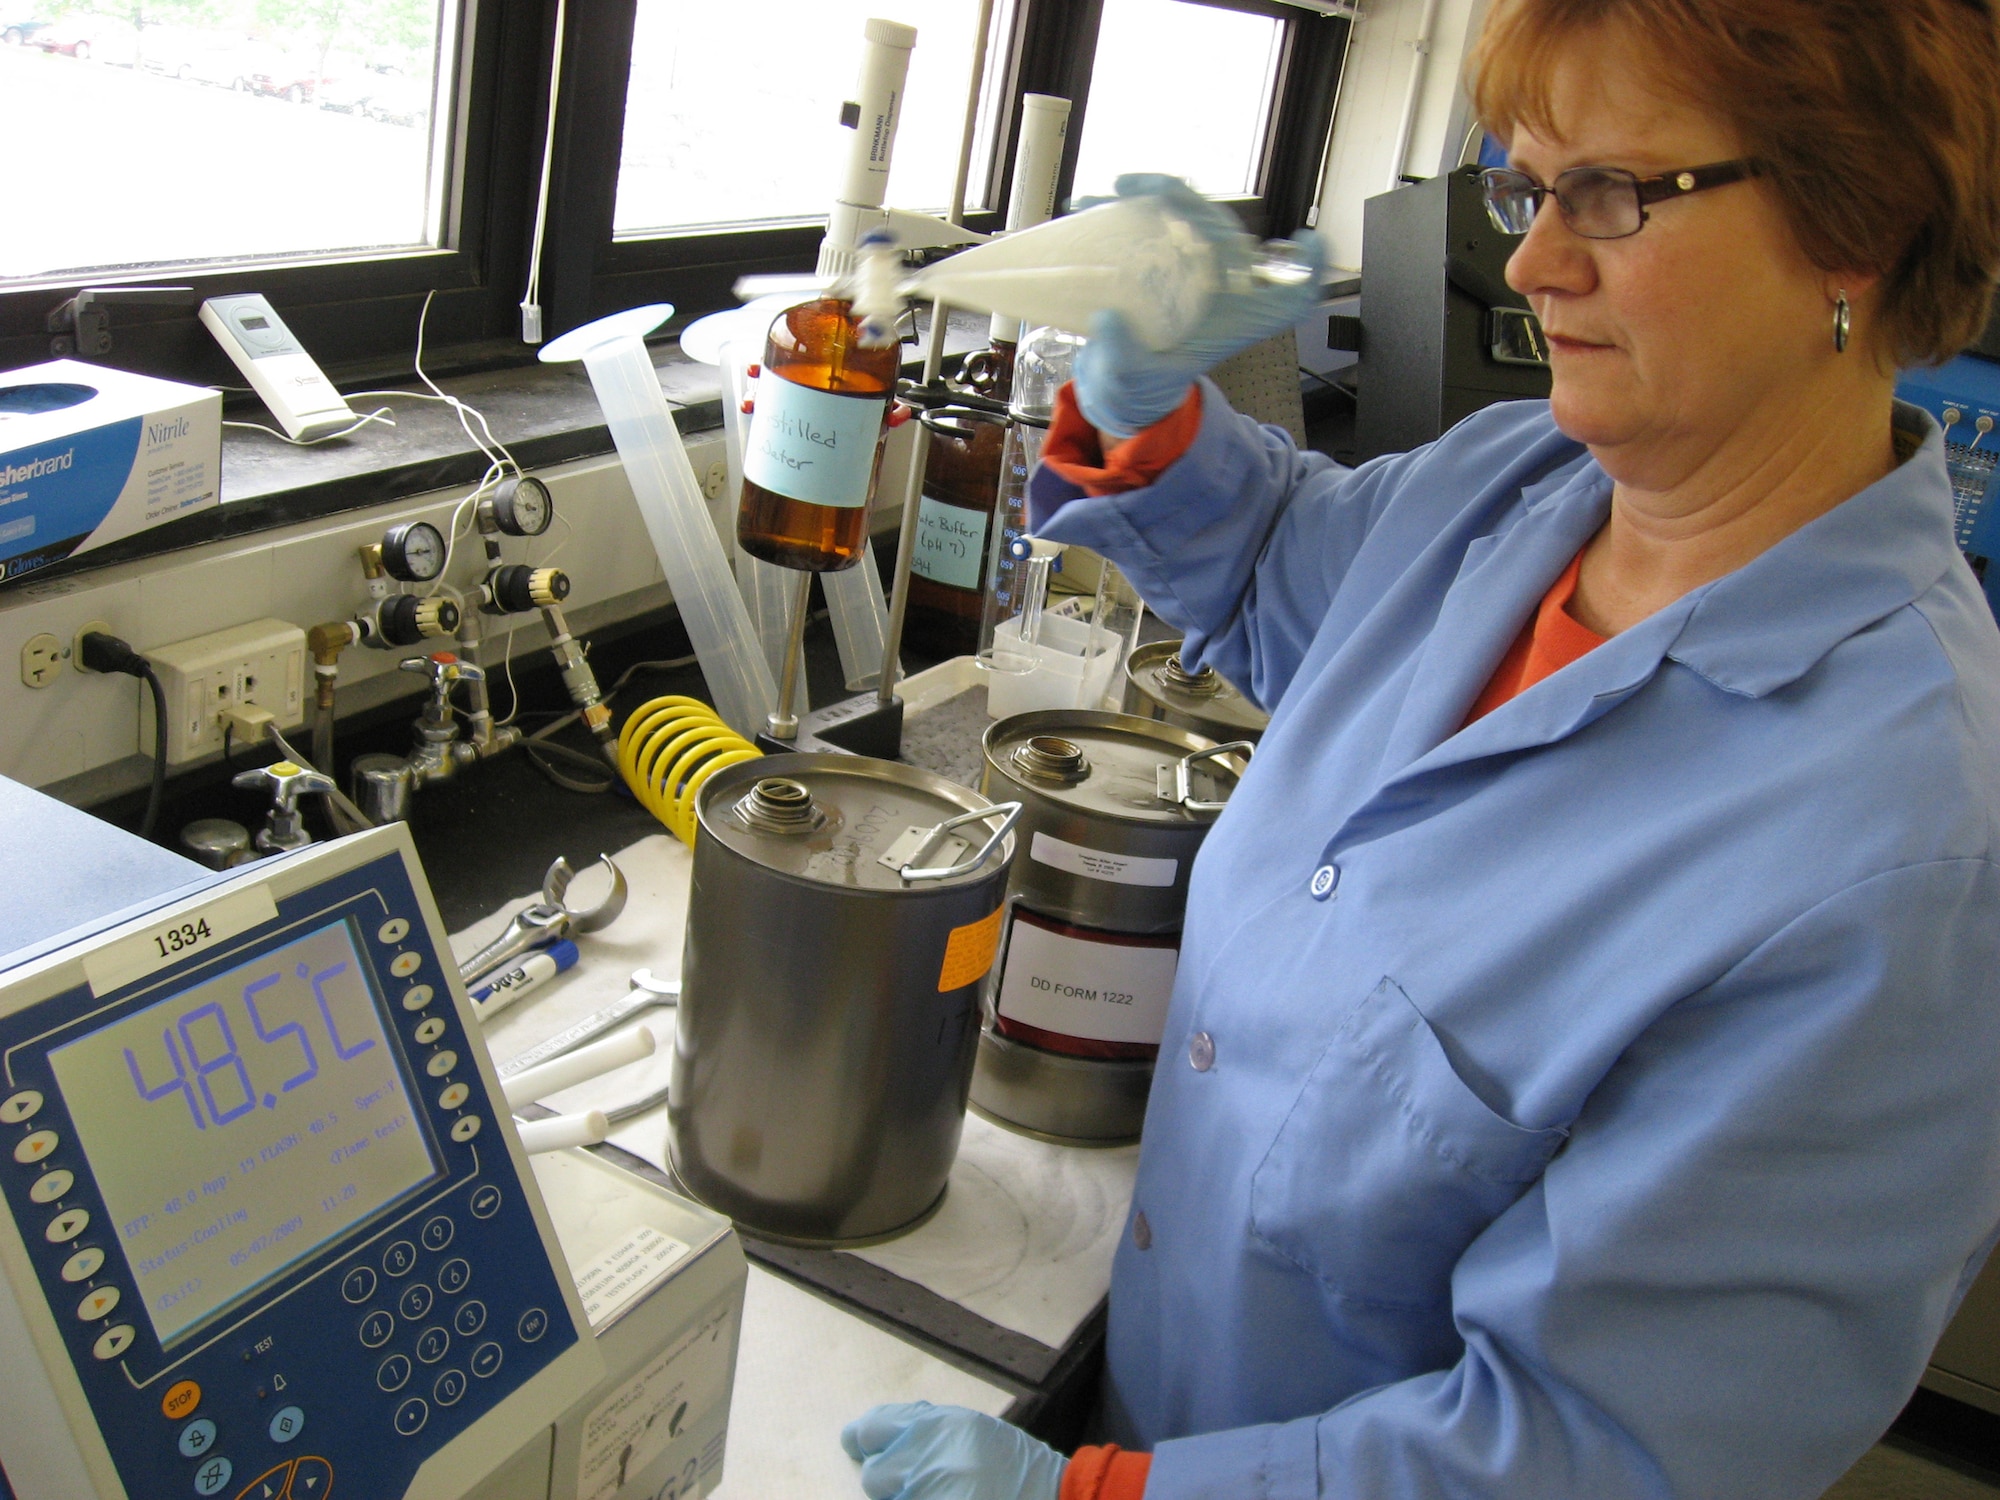 Janet Stewart concludes a test of the flash point temperature in a sample of commercial Jet A fuel while preparing to measure the concentration of fuel system icing inhibitor in another sample in the Aerospace Fuels Laboratory at Wright-Patterson Air Force Base, Ohio. Air Force Petroleum Agency and Air Force Research Laboratory researchers are partnering on an initiative to evaluate the use of commercial jet fuel in place of military standard JP-8 fuel. Ms. Stewart is a fuels quality assurance specialist with the Aerospace Fuels Laboratory at Wright-Patterson AFB. (U.S. Air Force photo/Derek Kaufman)